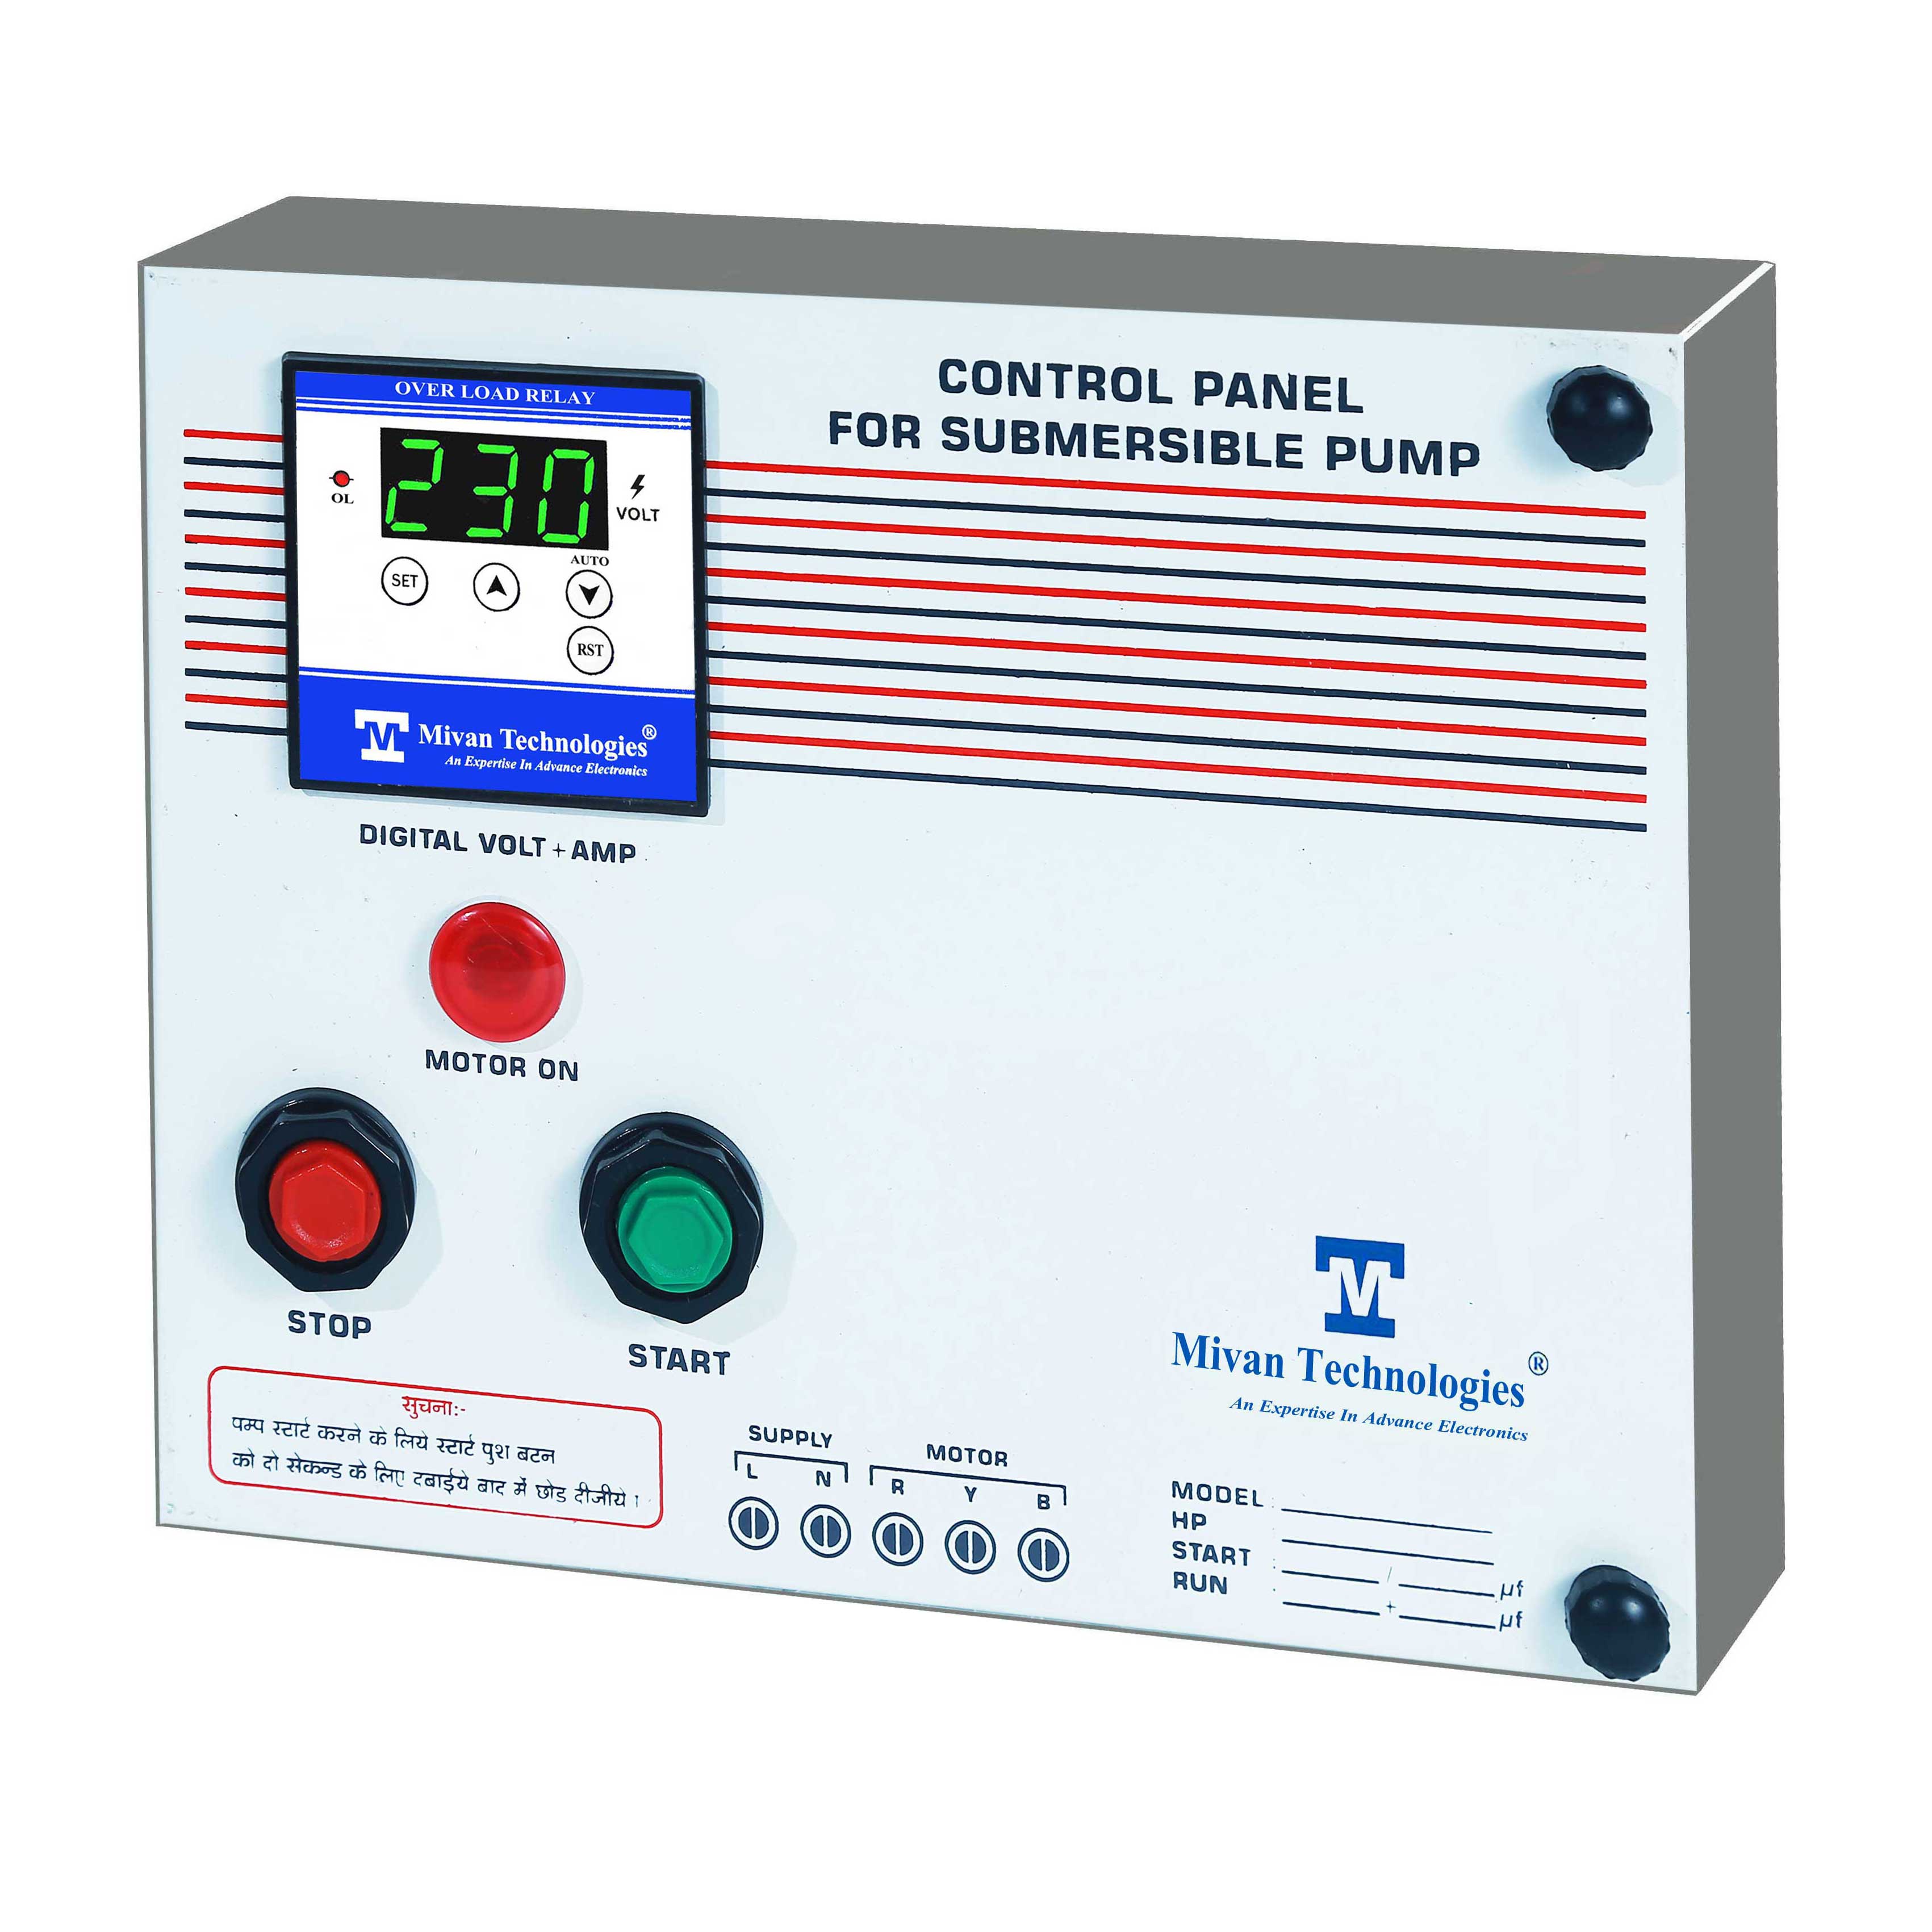 DS SR METAL Digital motor starter panel with start and run capacitor with volt and amp meter with HV LV OL DRY RUN Protection with timer suitable FOR 1 HP